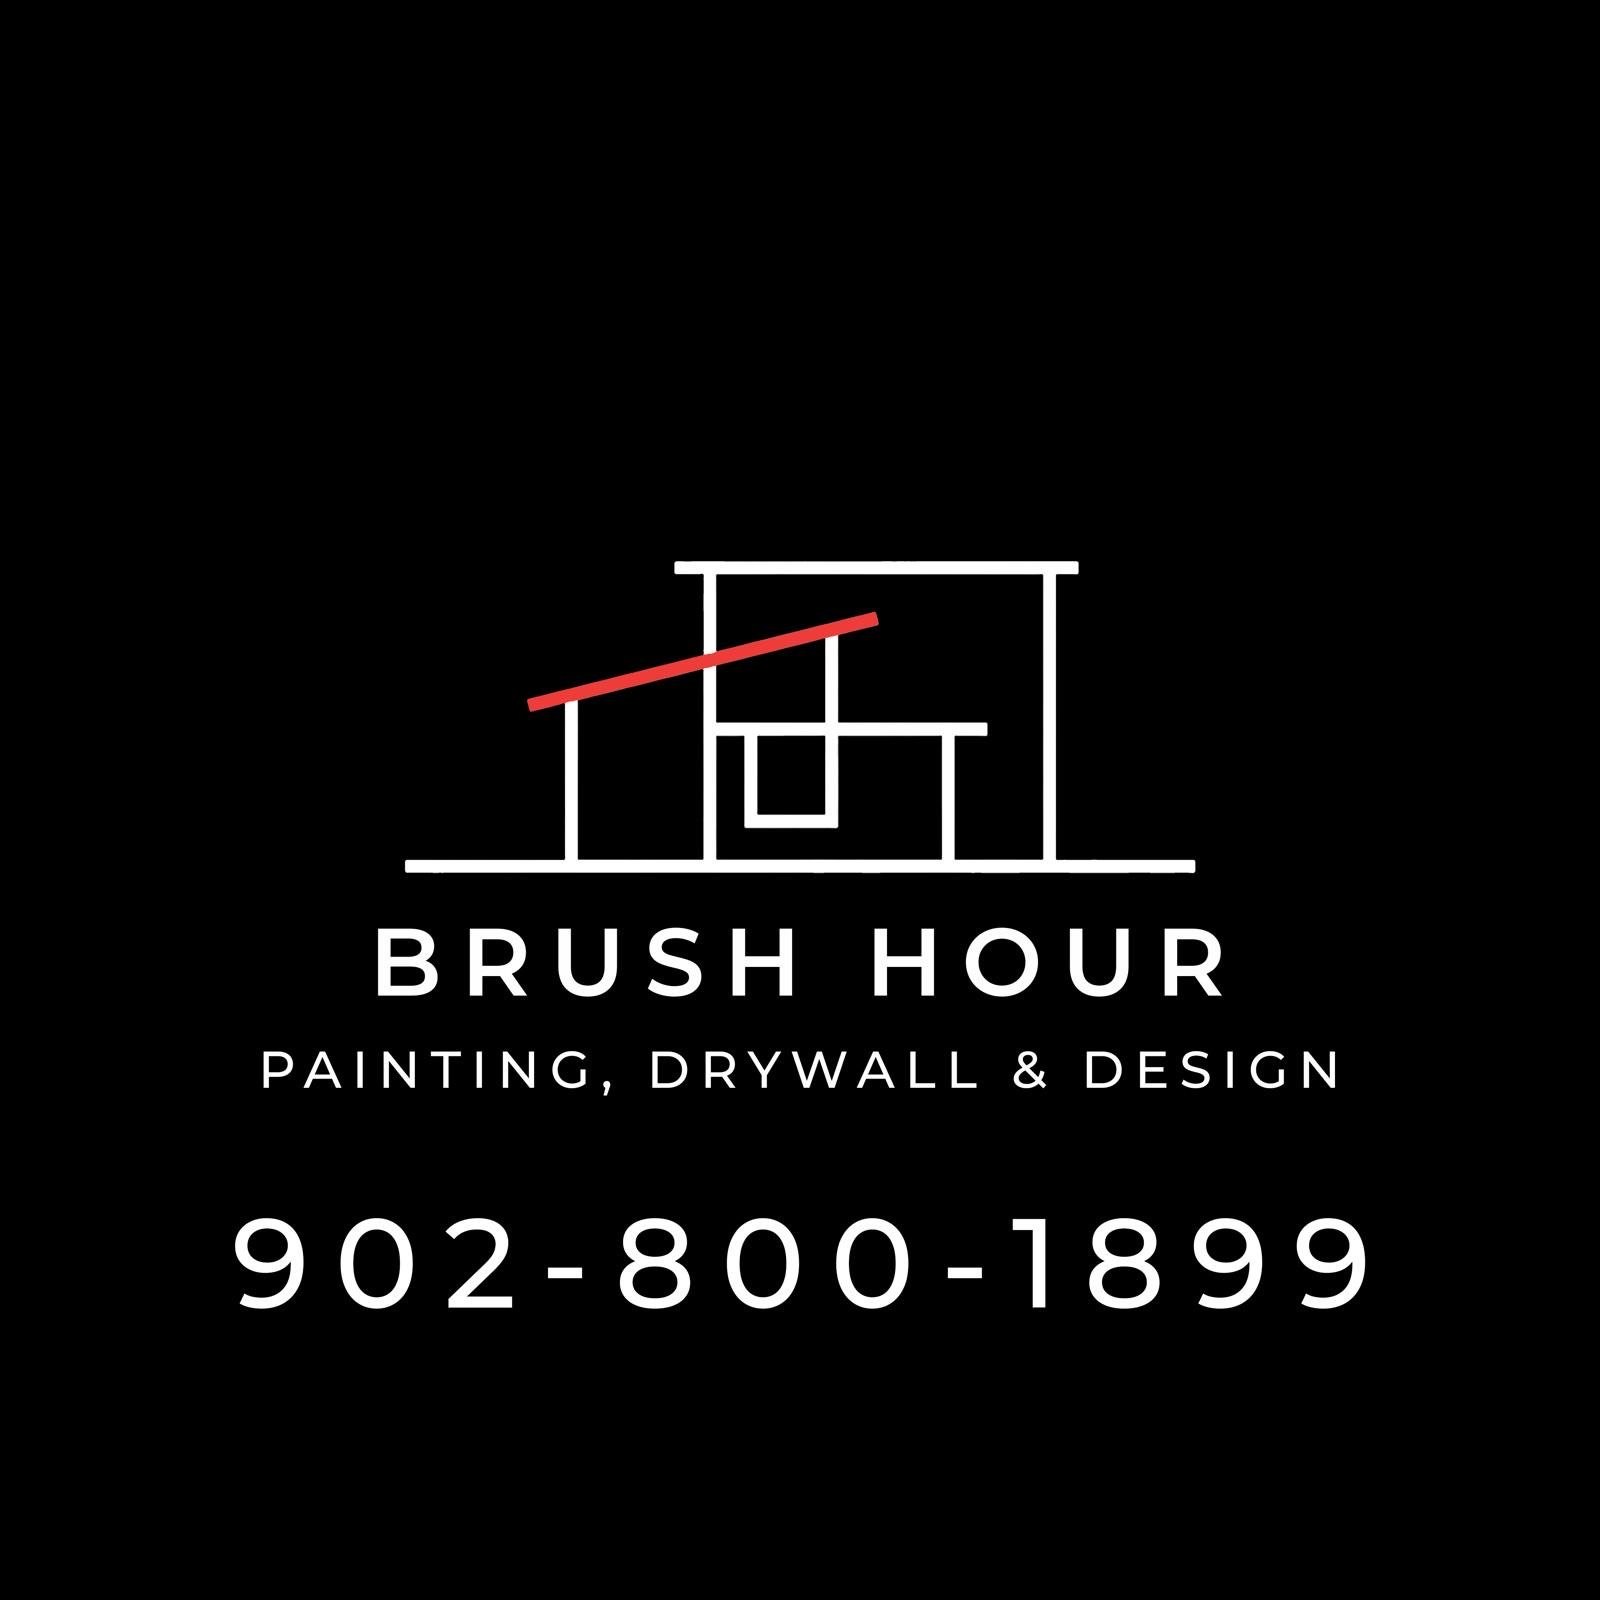 Brush Hour Painting and Drywall Services Logo